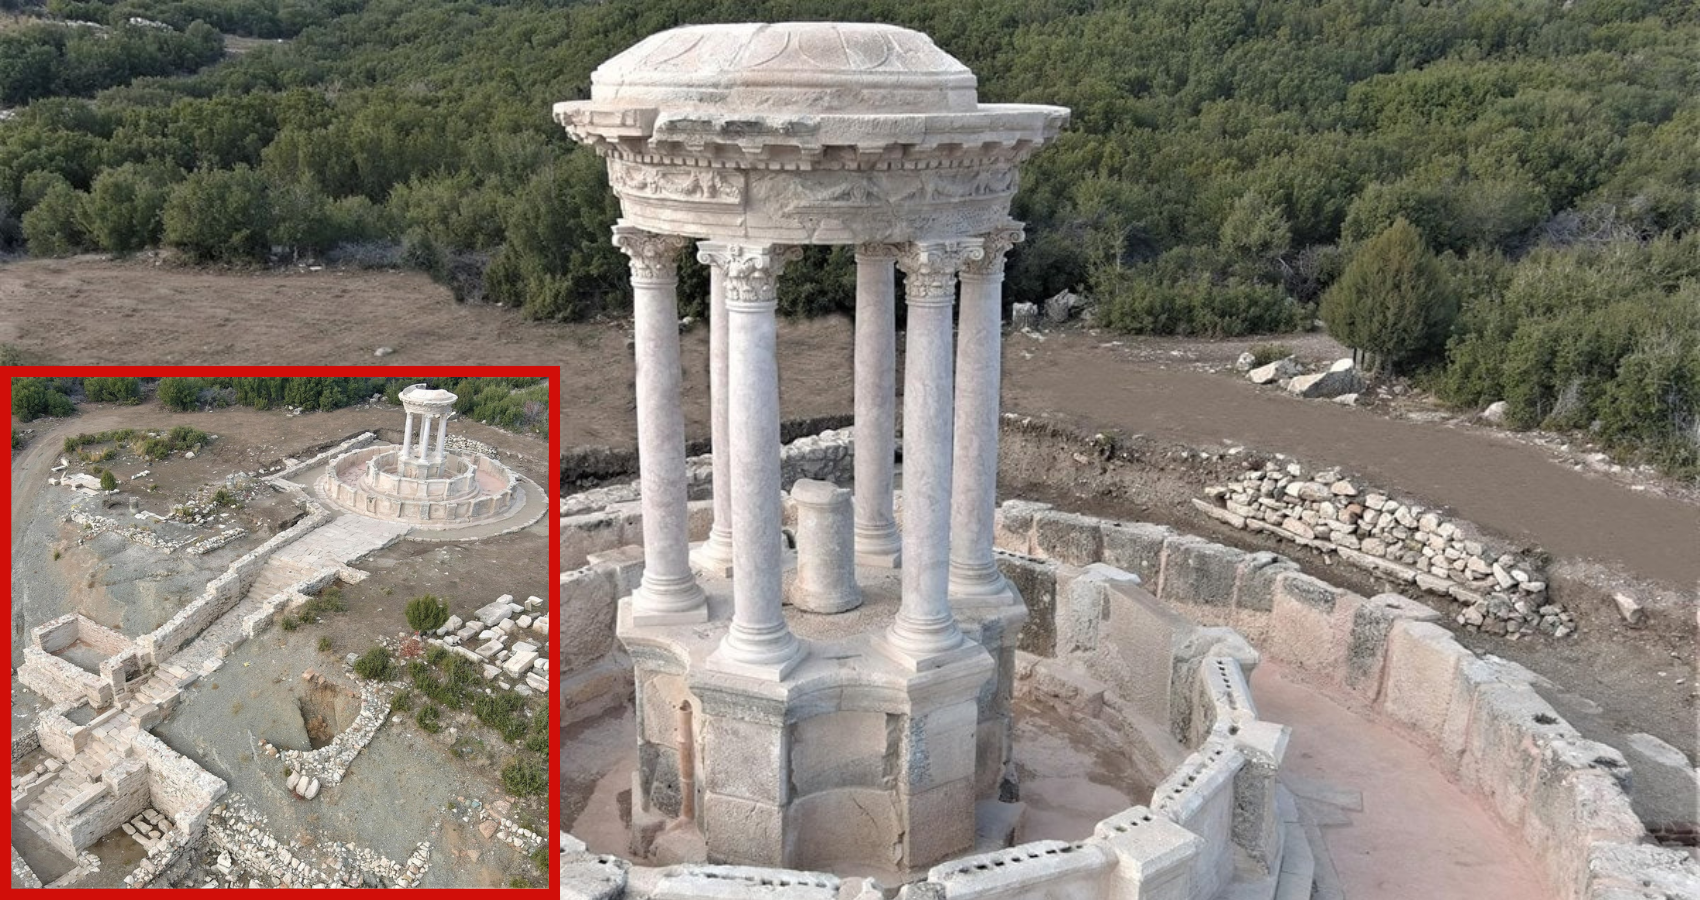 After 1,300 years, water to again flow from monumental fountain in the City of Gladiators in Turkey